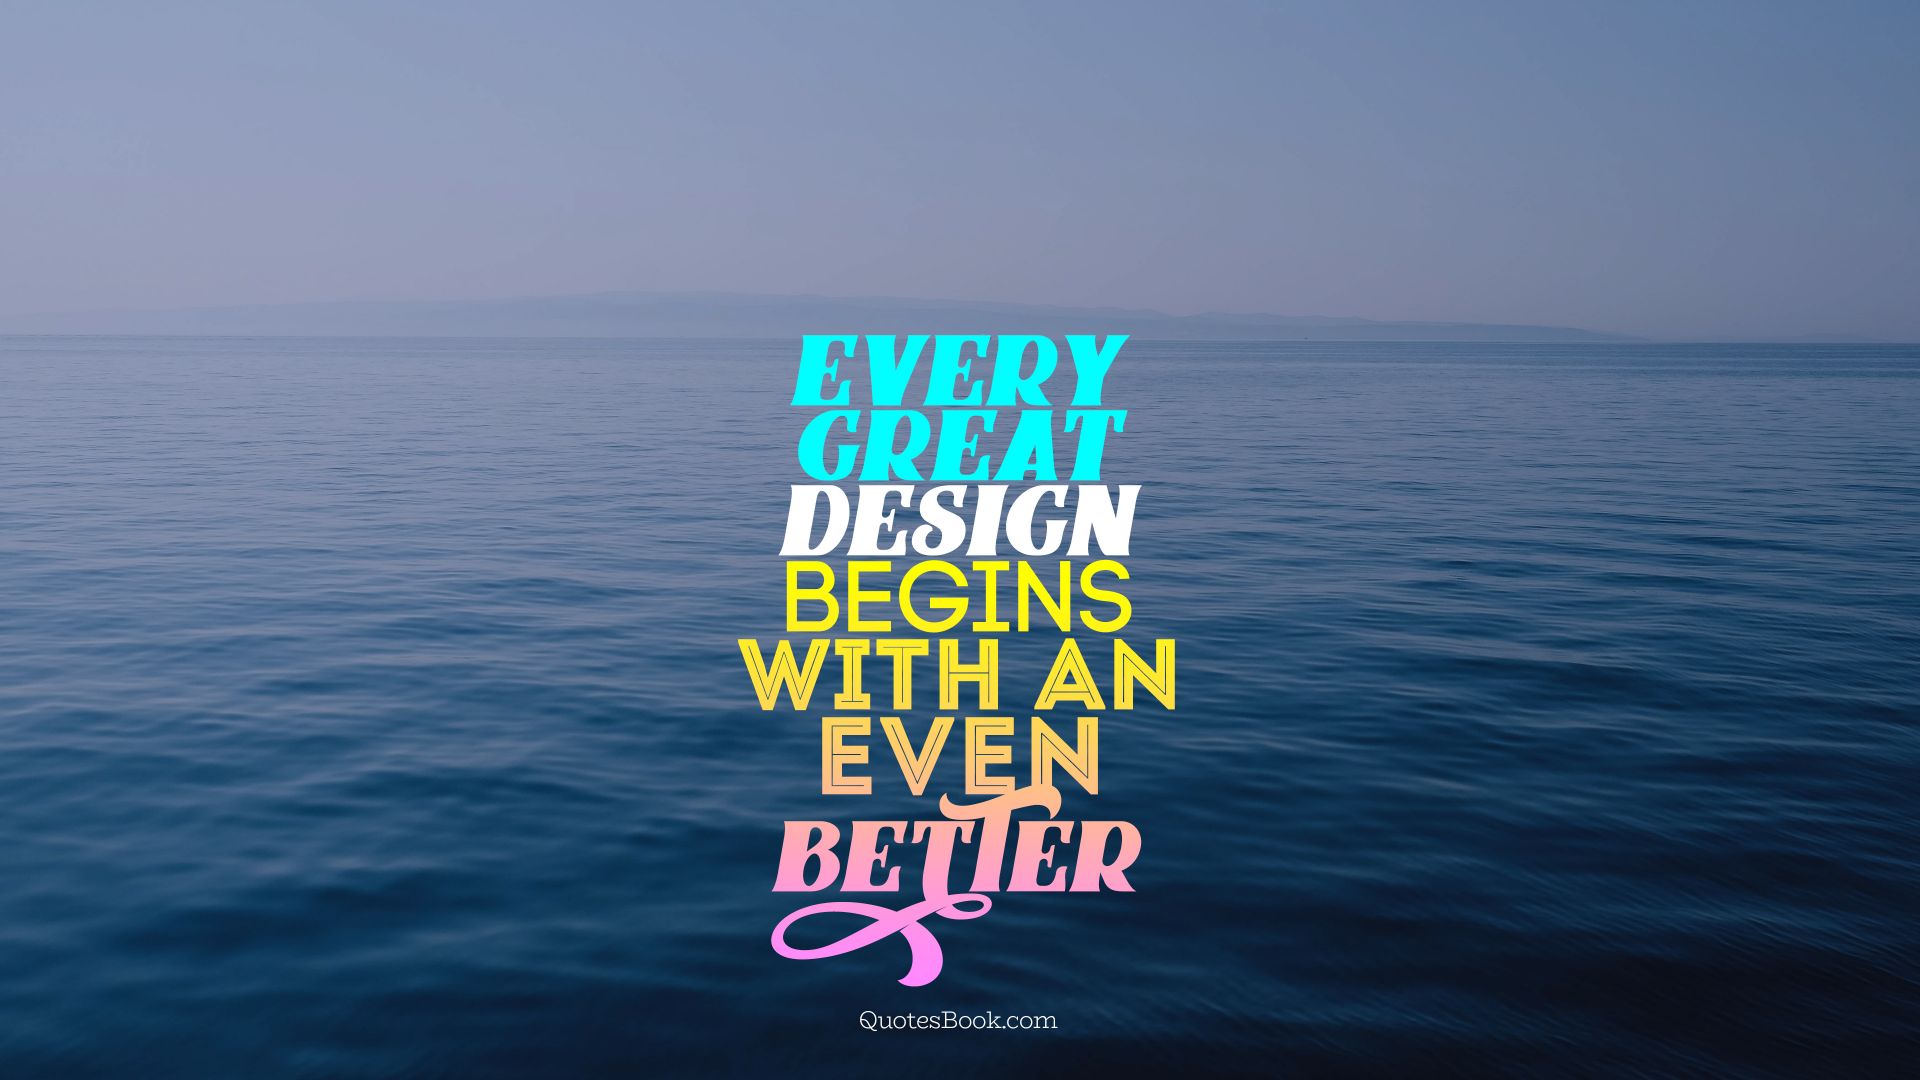 Every great design begins with an
even better story